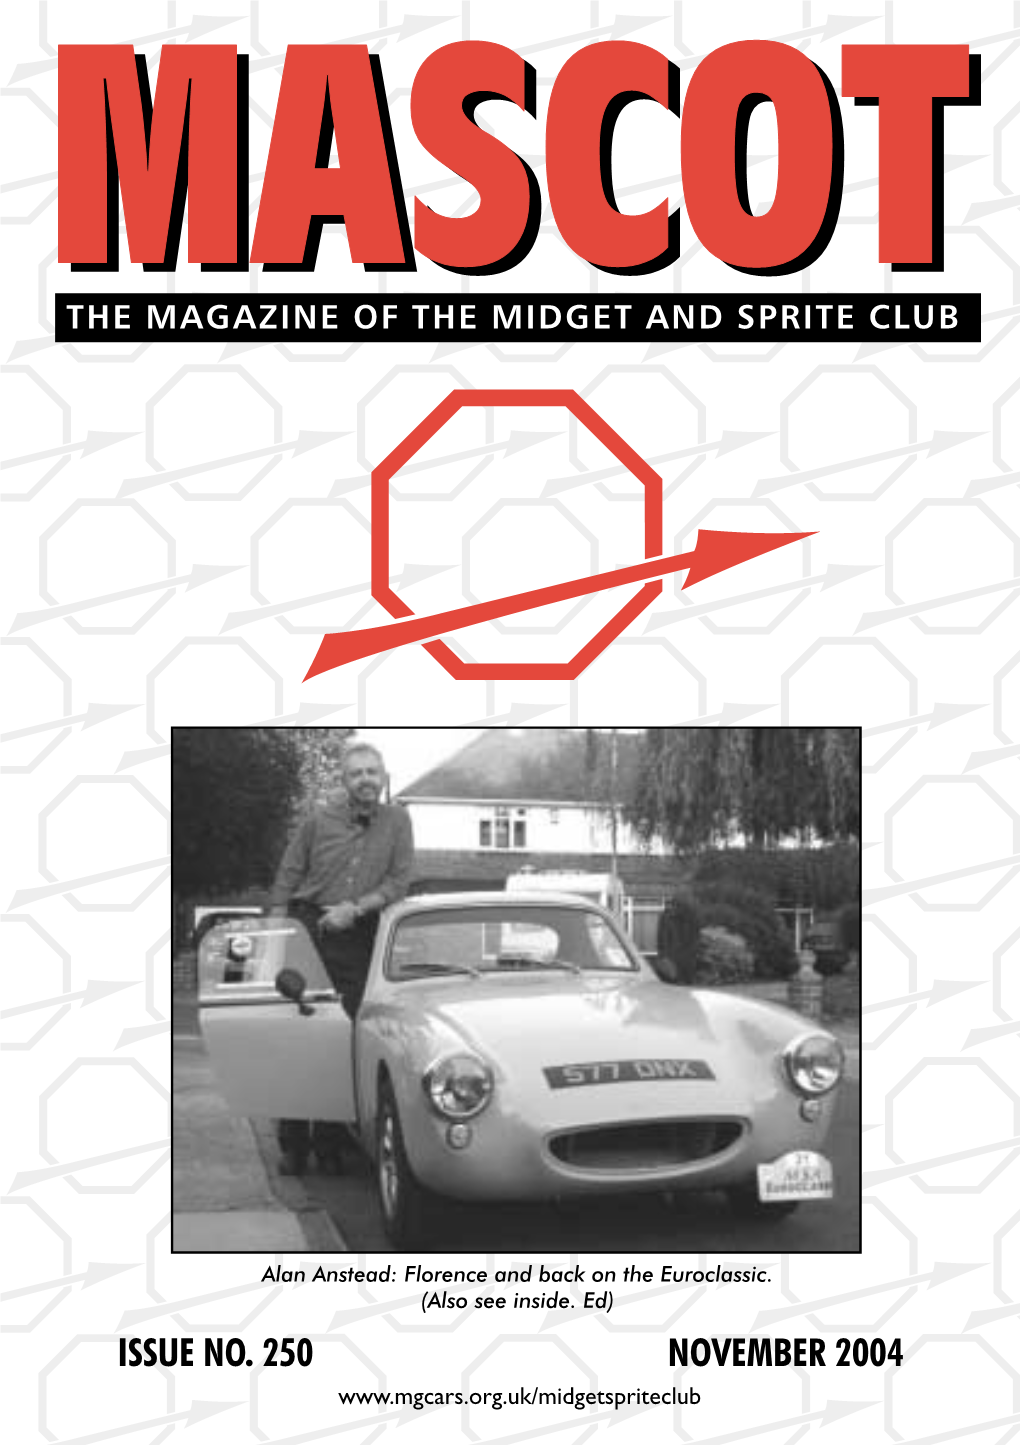 ISSUE NO. 250 NOVEMBER 2004 the WHO, the WHAT & the WHERE of the MIDGET & SPRITE CLUB